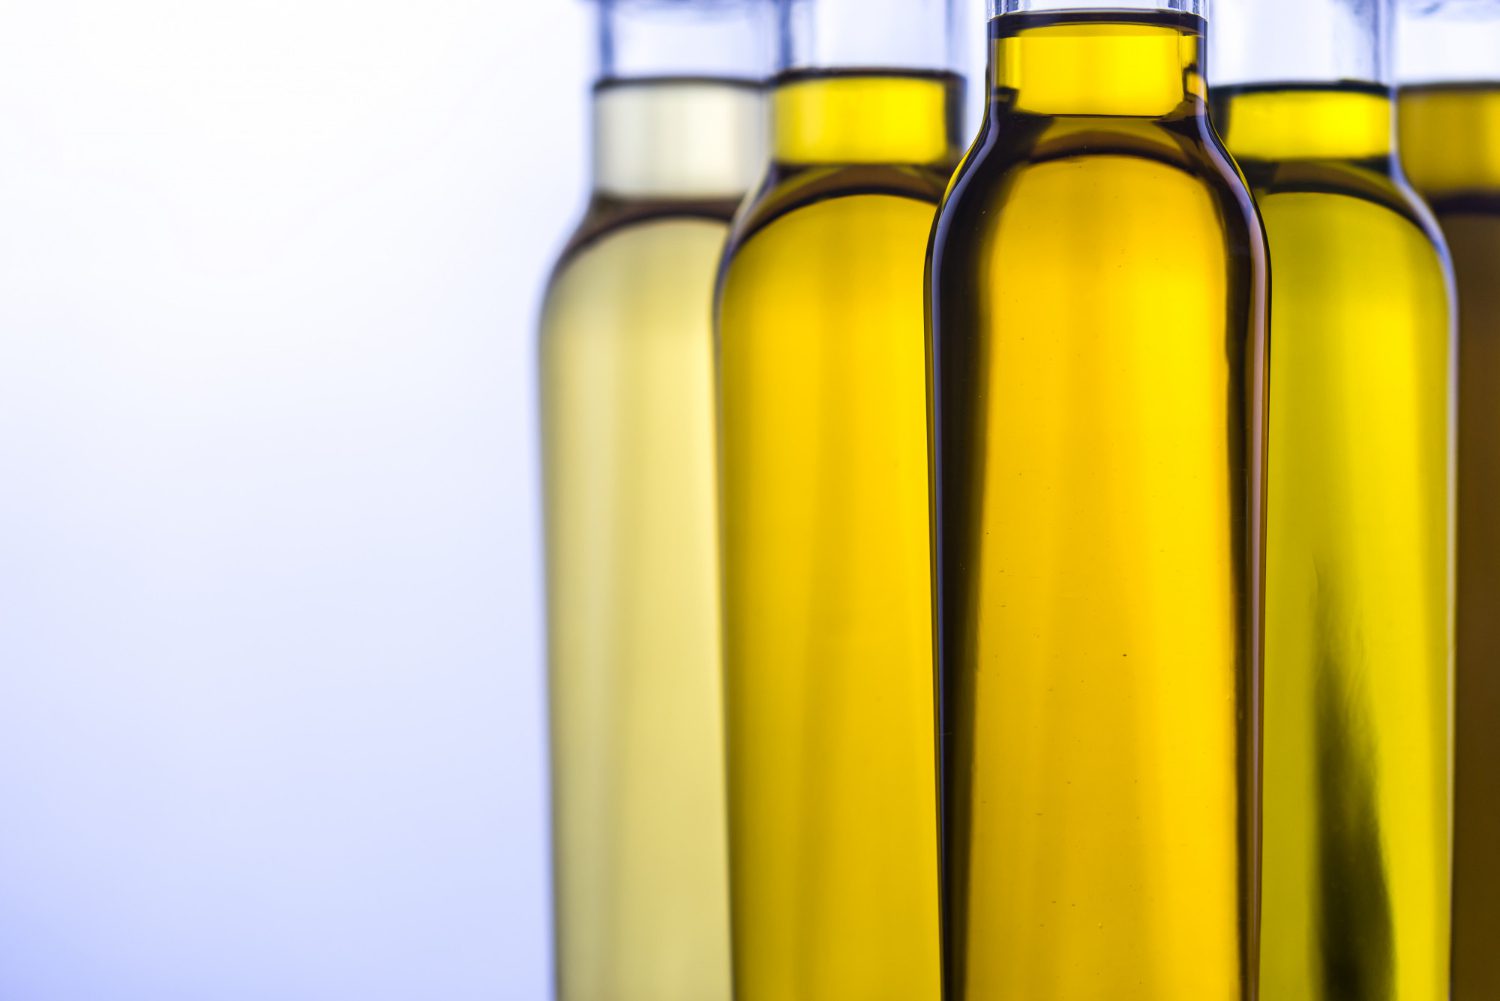 Row of elegant bottles filled with golden CanolaMAX cooking oil, highlighted against a light background.